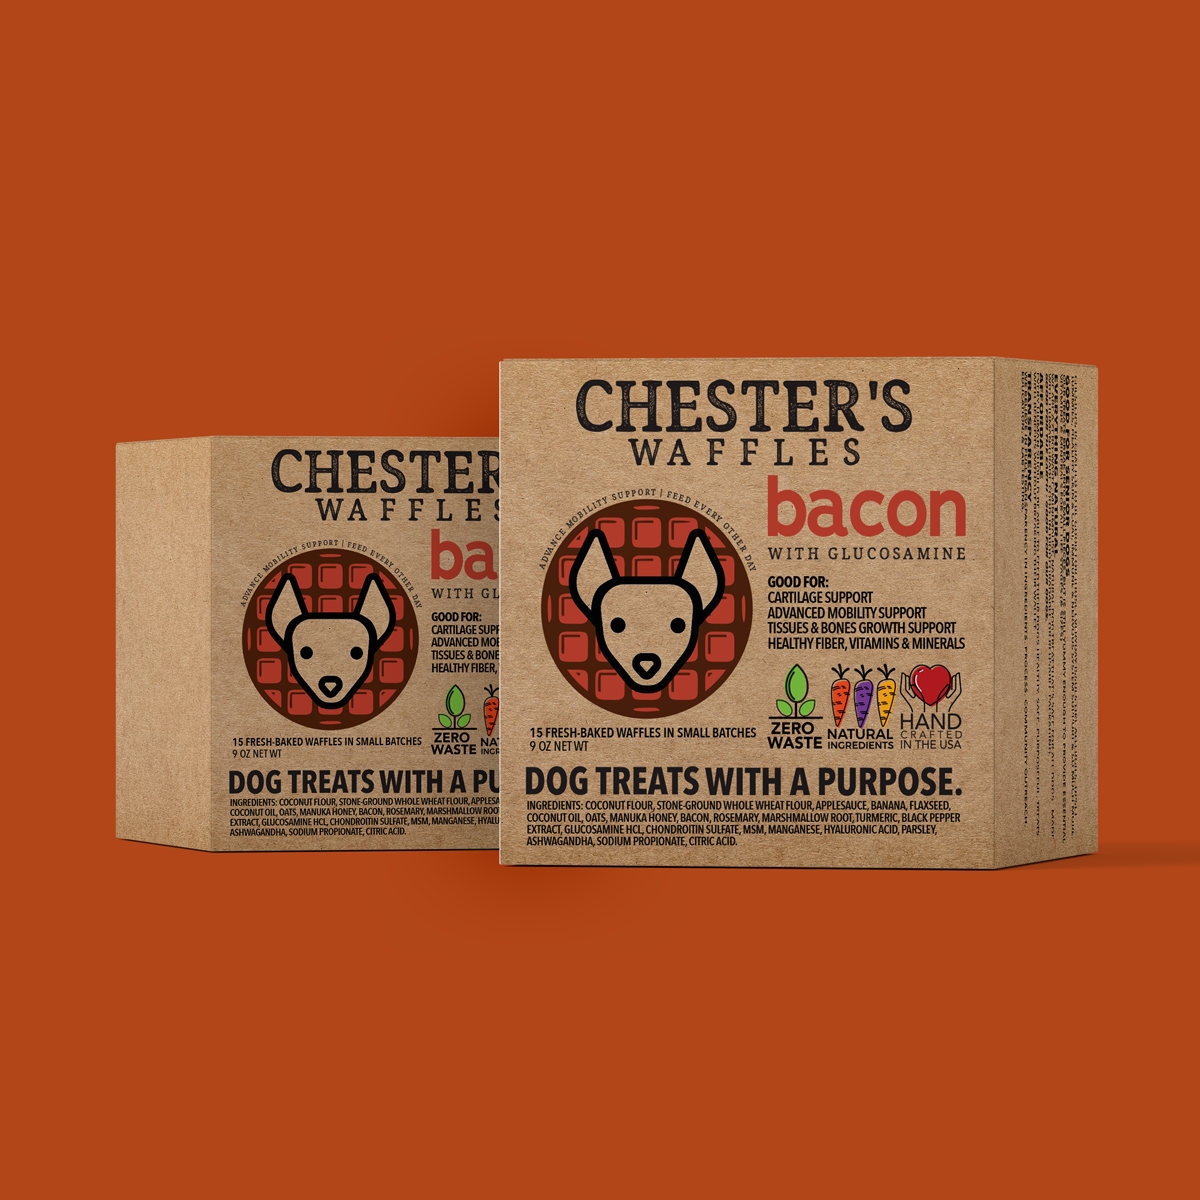 CHESTER’S BACON HONEY WAFFLES WITH GLUCOSAMINE FOR ADVANCED MOBILITY SUPPORT